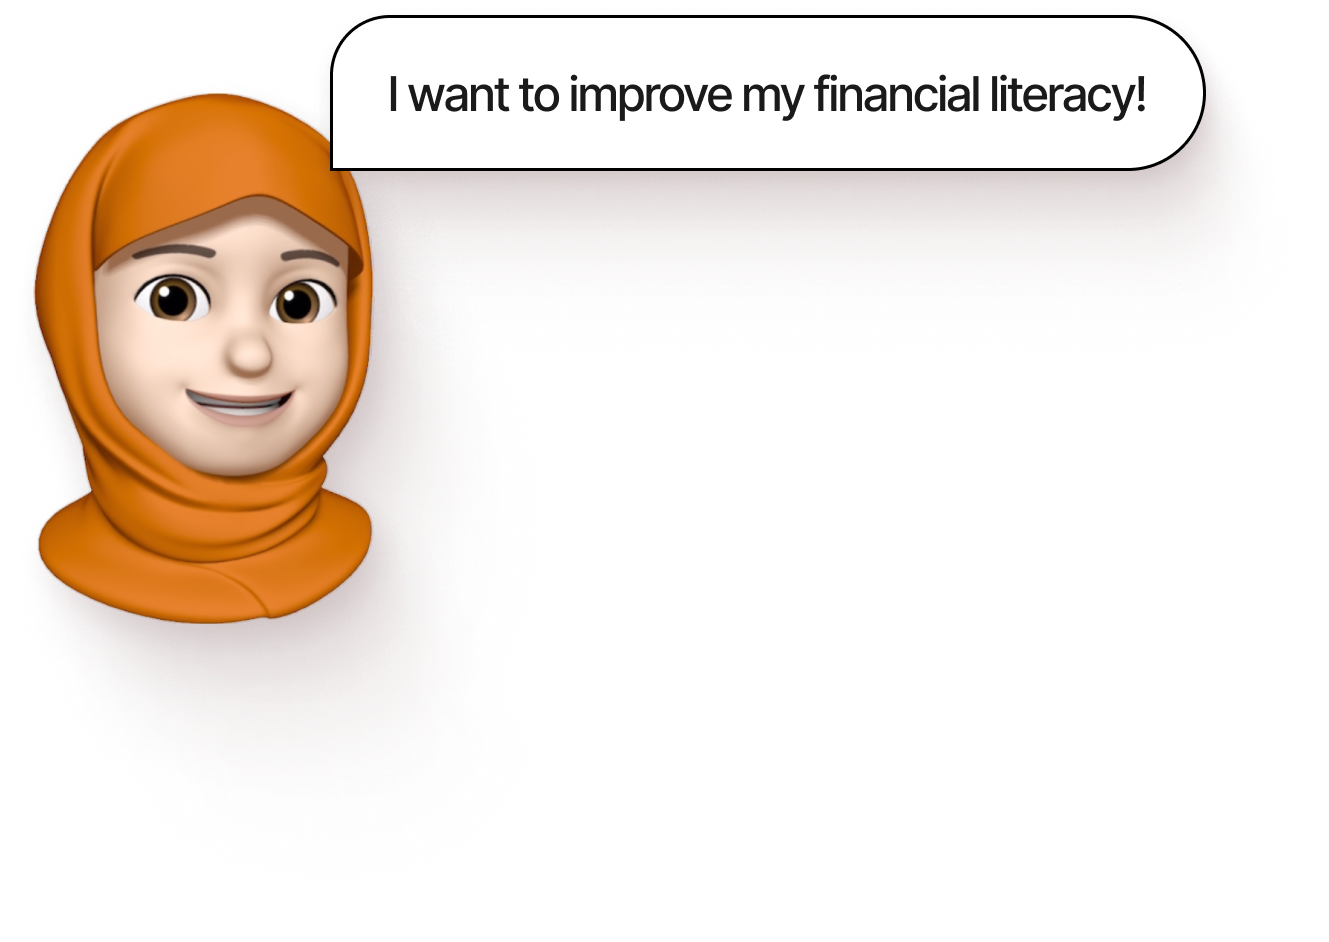 I want to improve my financial literacy!